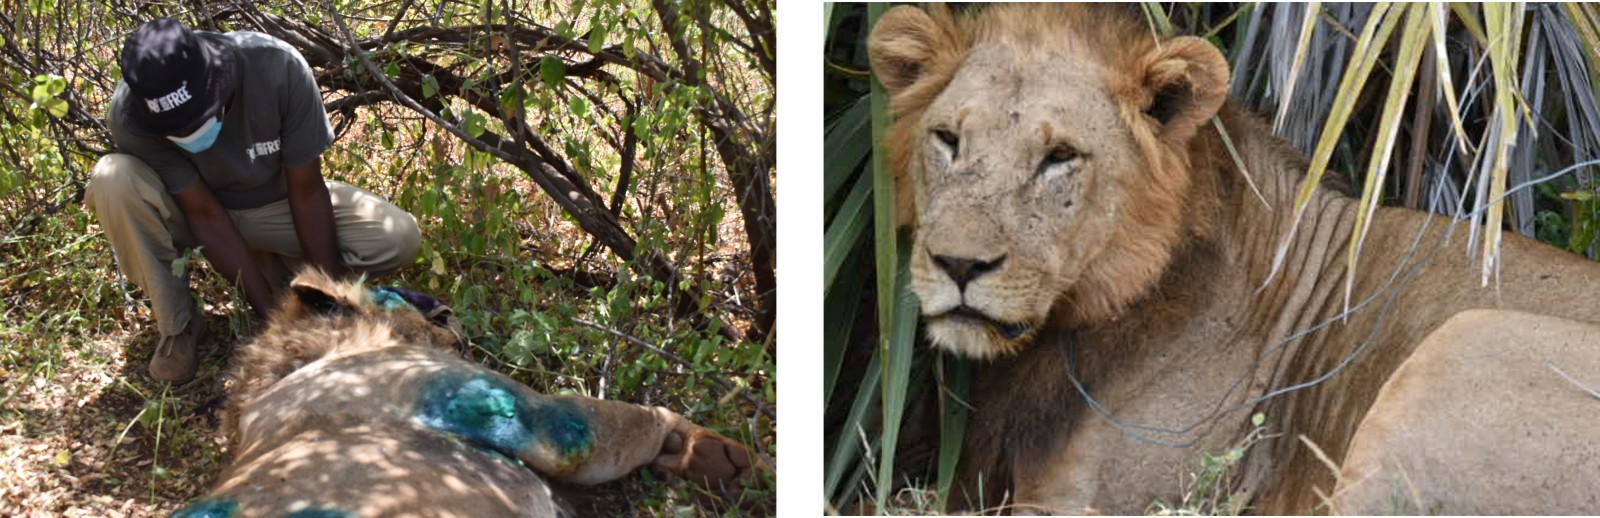 Two images of lions. On the left an injured lion is lying on the ground with blue paint on his wounds. He is being tended to by a veterinary professional. On the right a male lion recovers in the long grass after his anaesthetic.